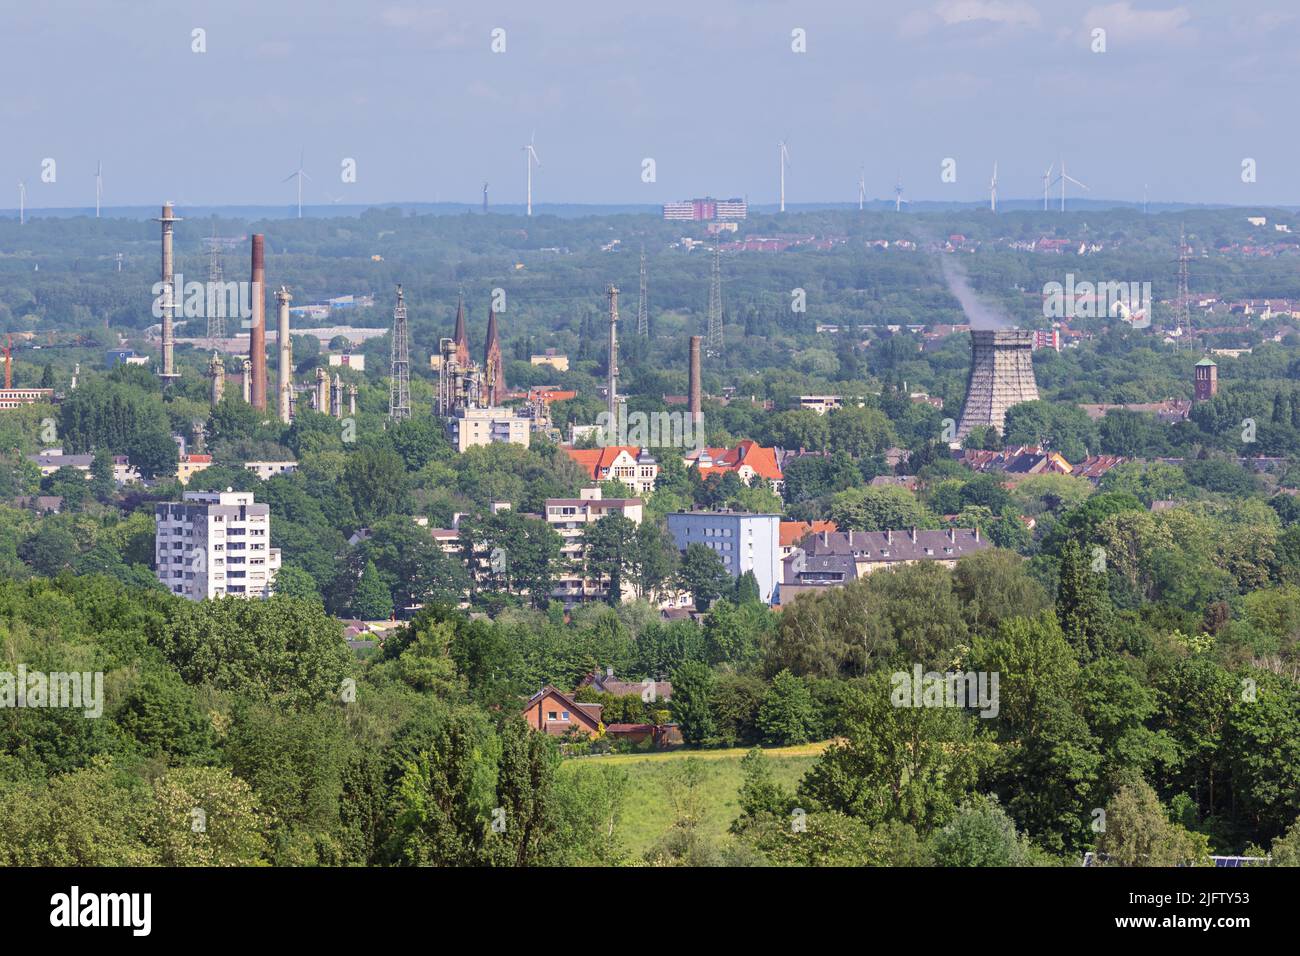 View from the Halde Hoheward, over the vicinity around Herten in the Rurh area Stock Photo